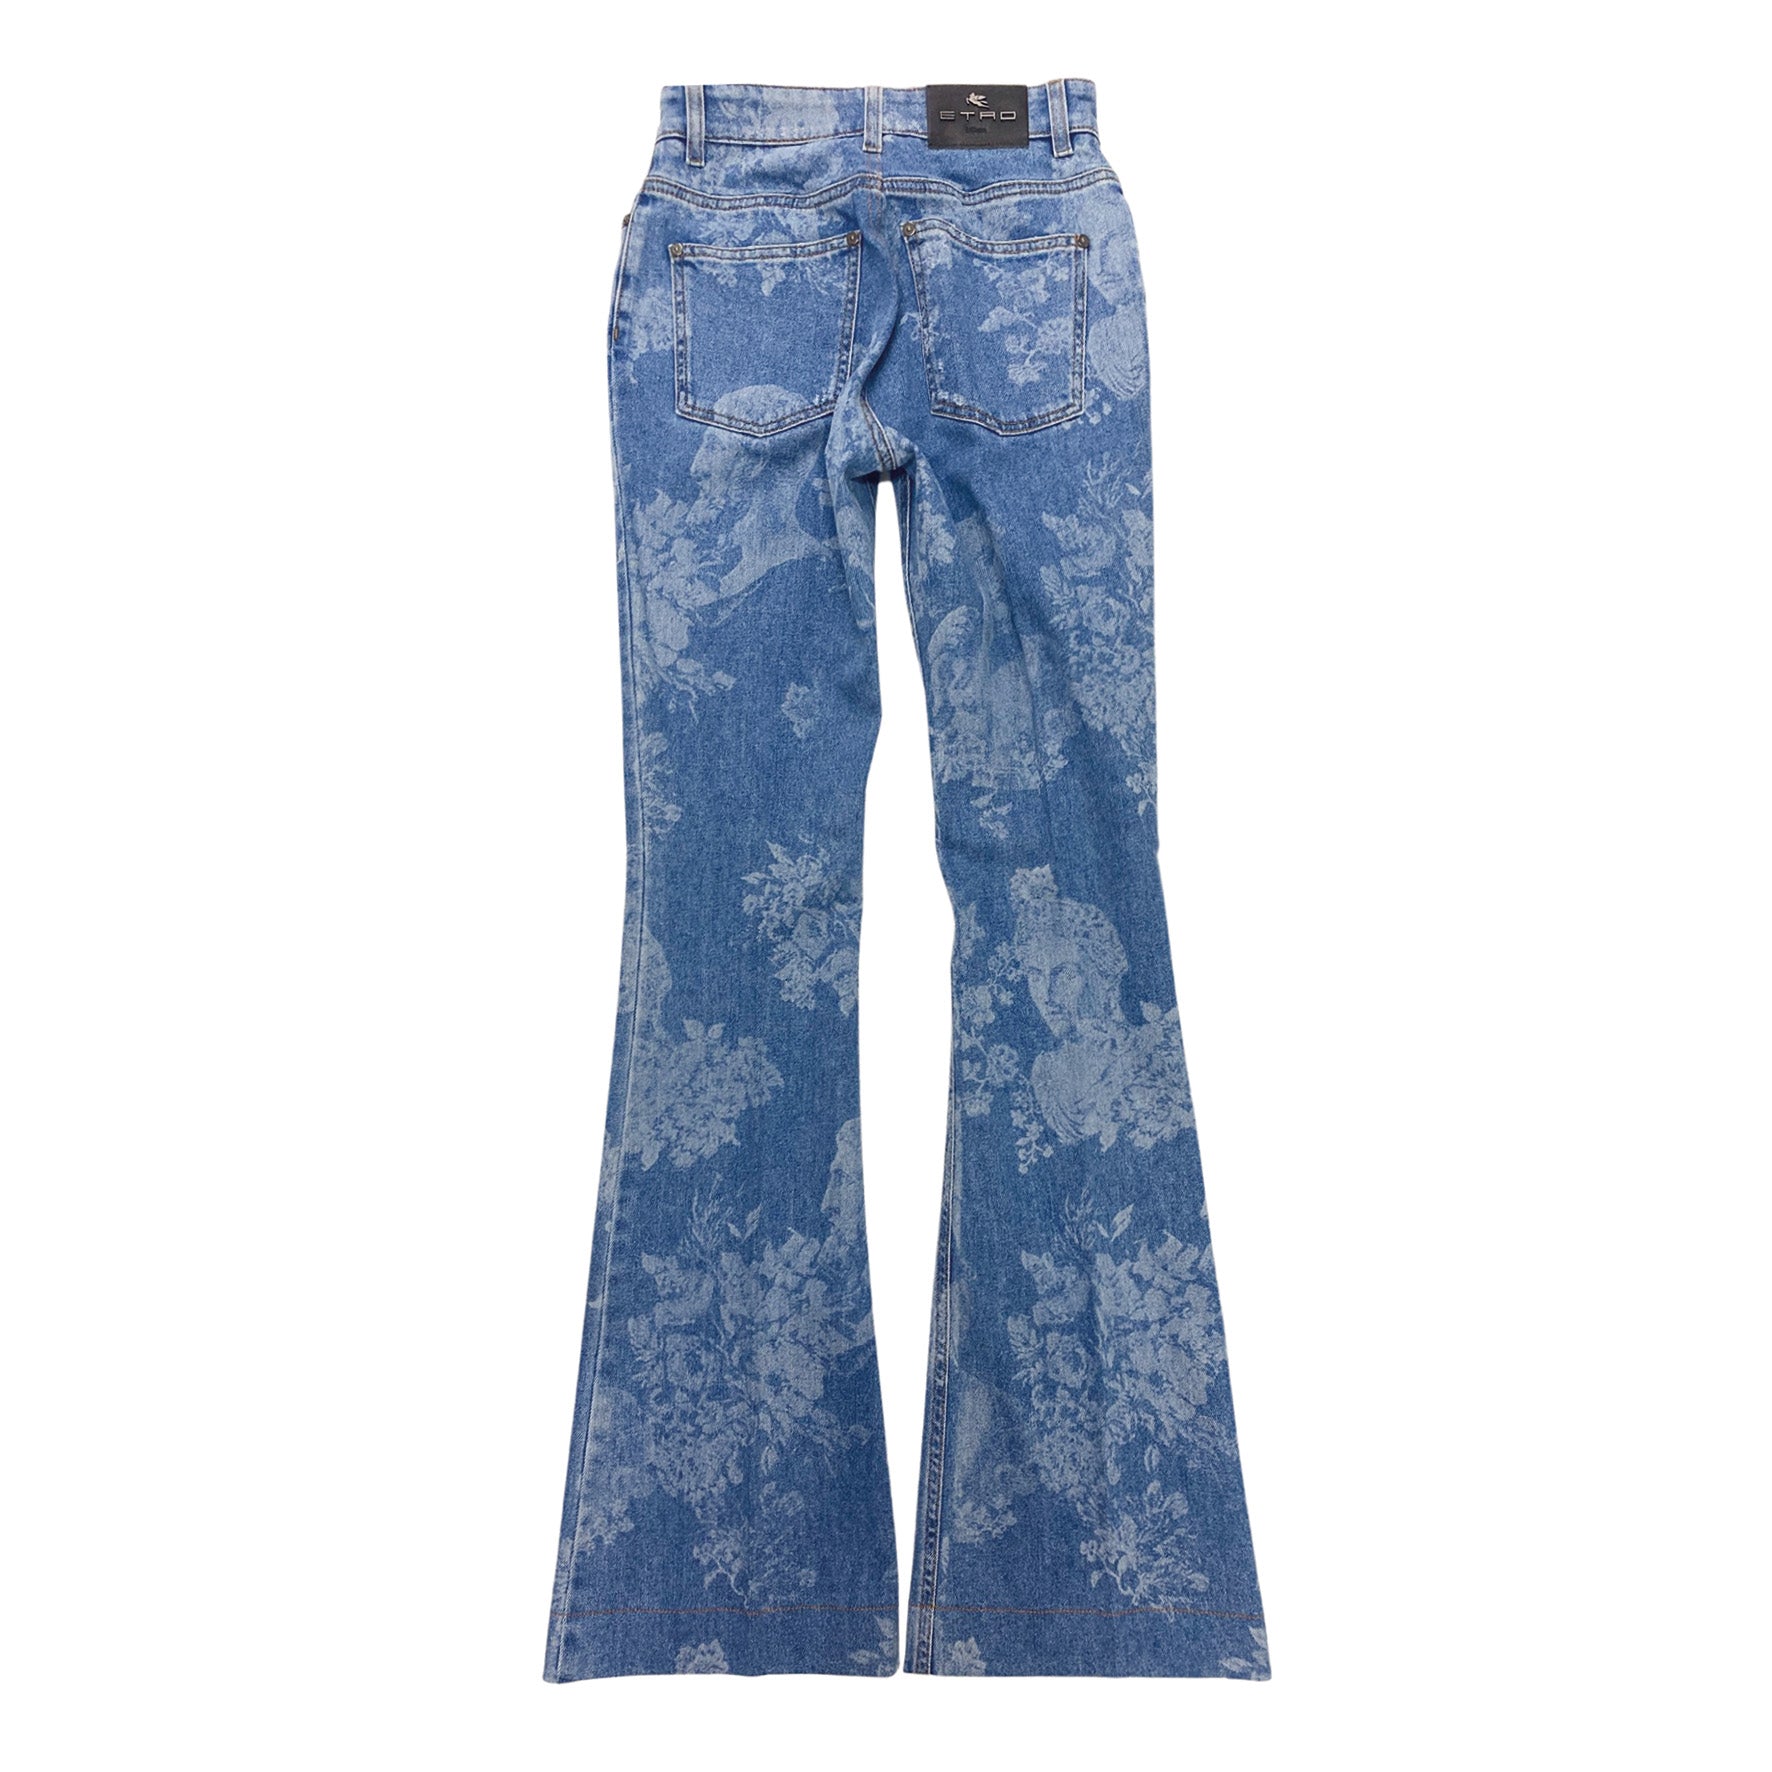 ETRO buttoned flared jeans - Blue